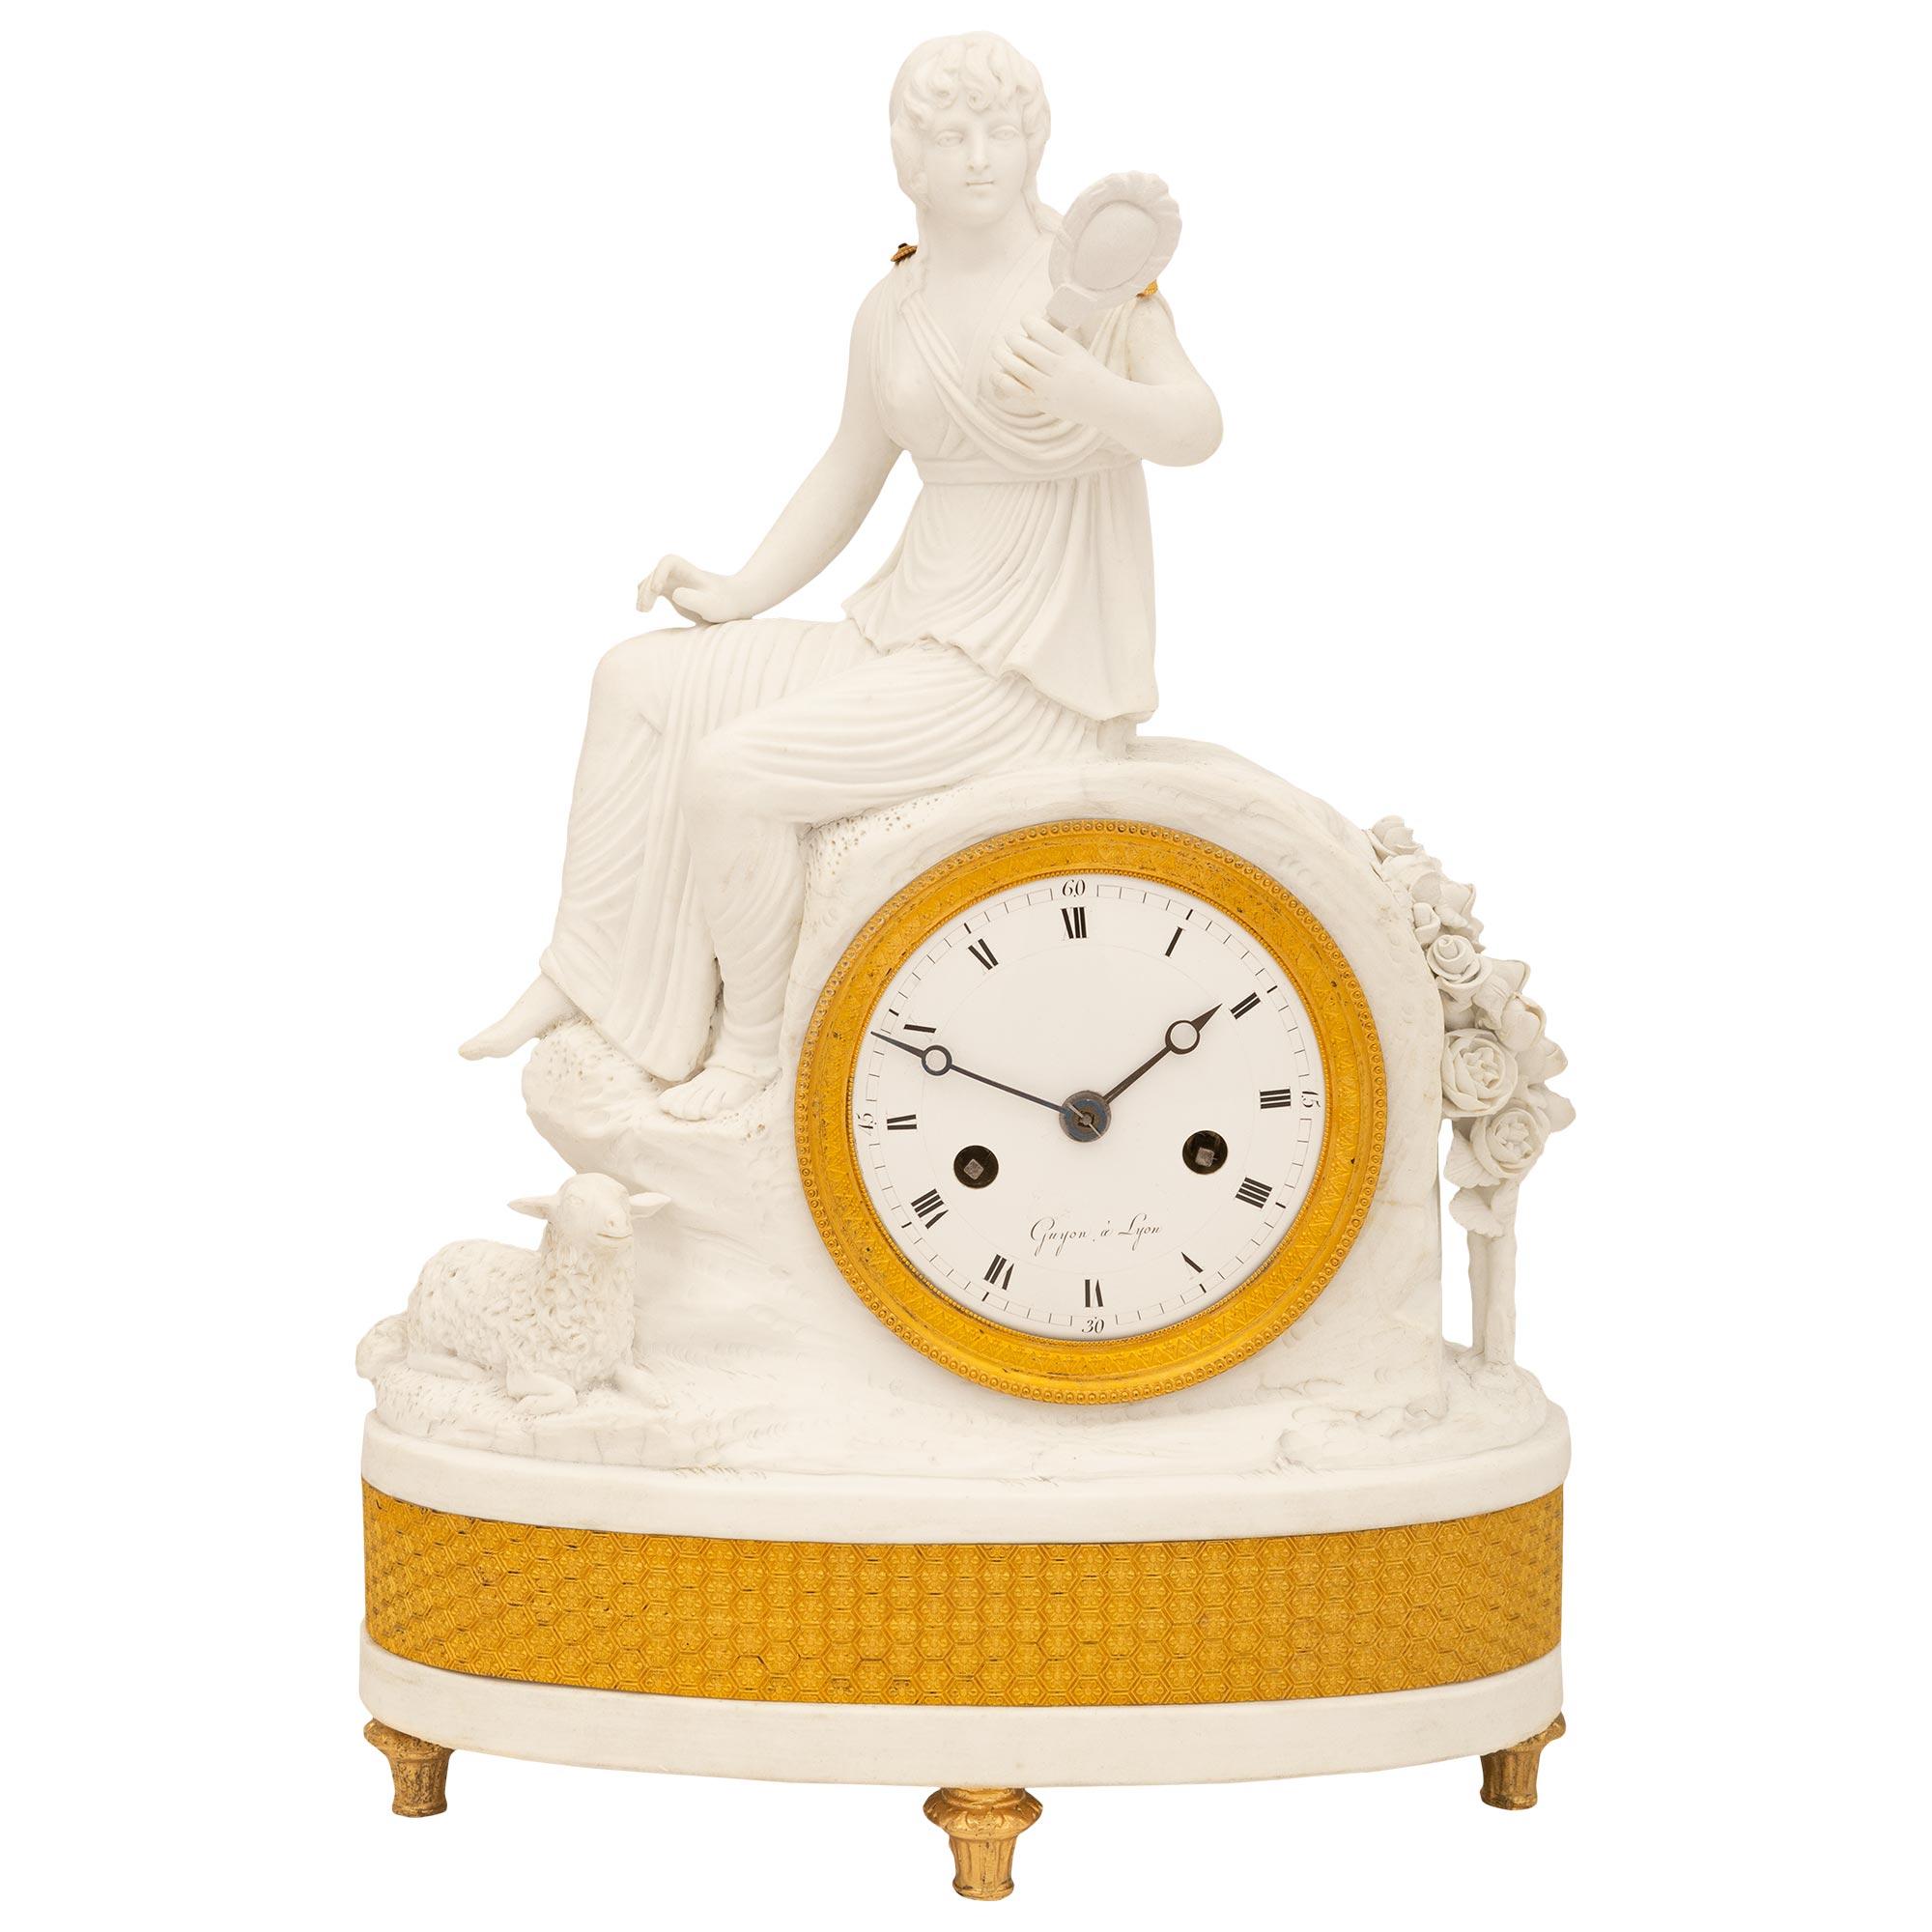 French Neoclassical Style Sevres Bisque Clock Signed Guyon a Lyon For Sale 7